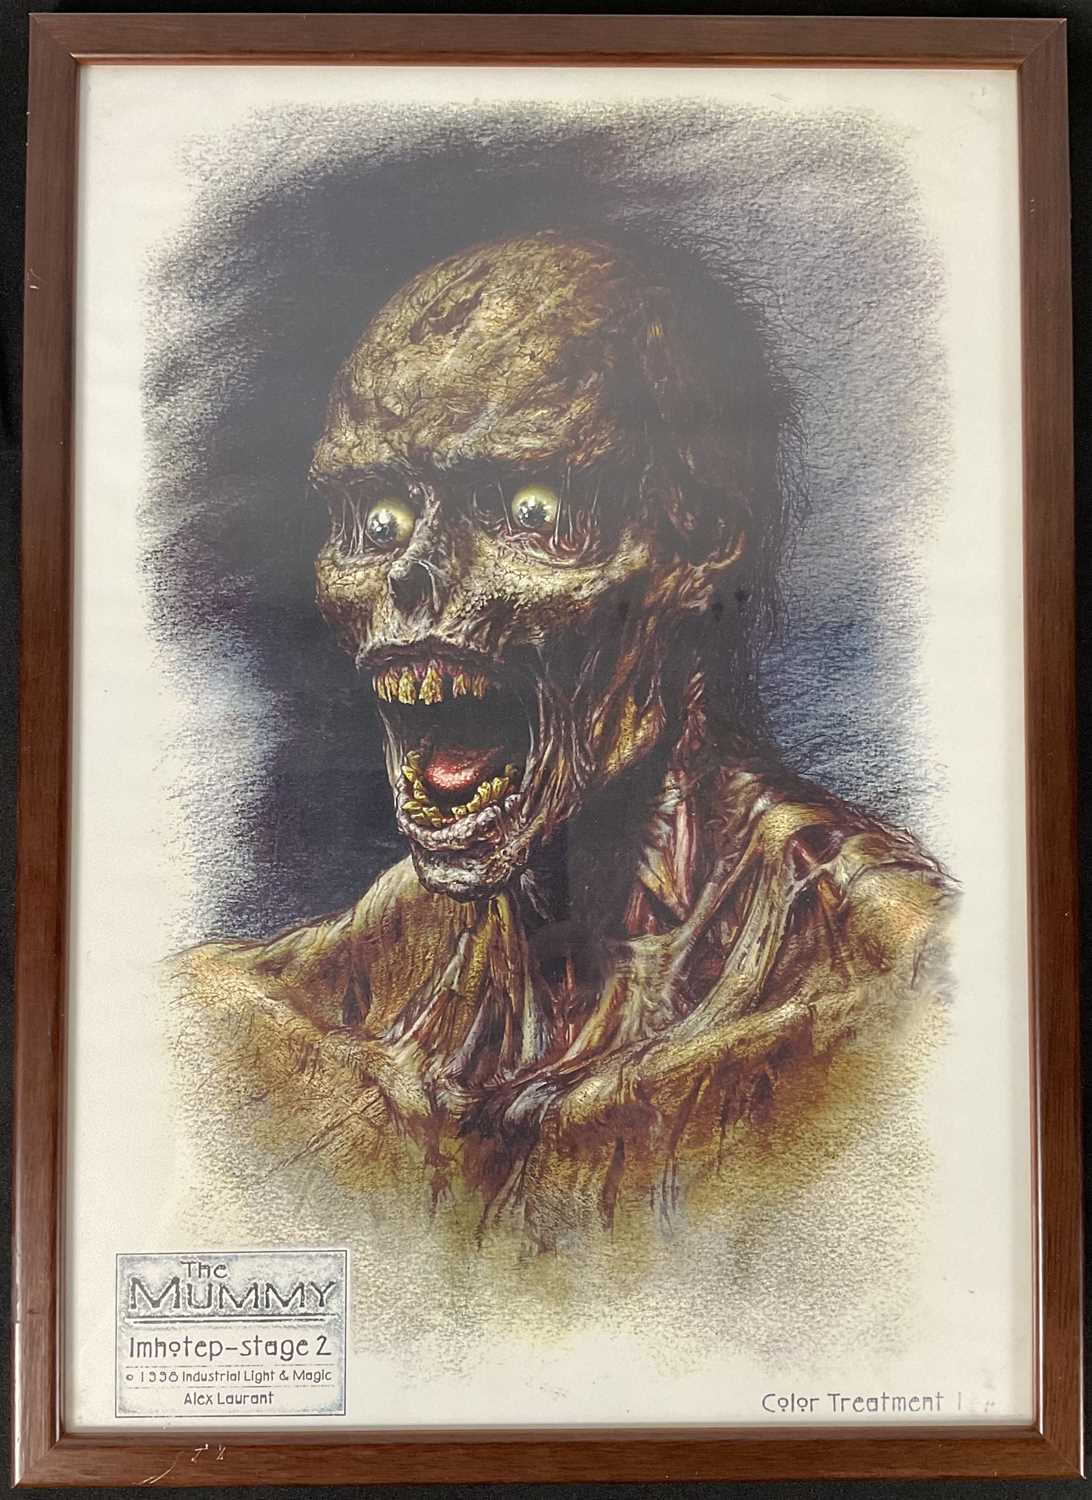 A print of a piece of concept art for the character of Imhotep from the movie THE MUMMY (1999)